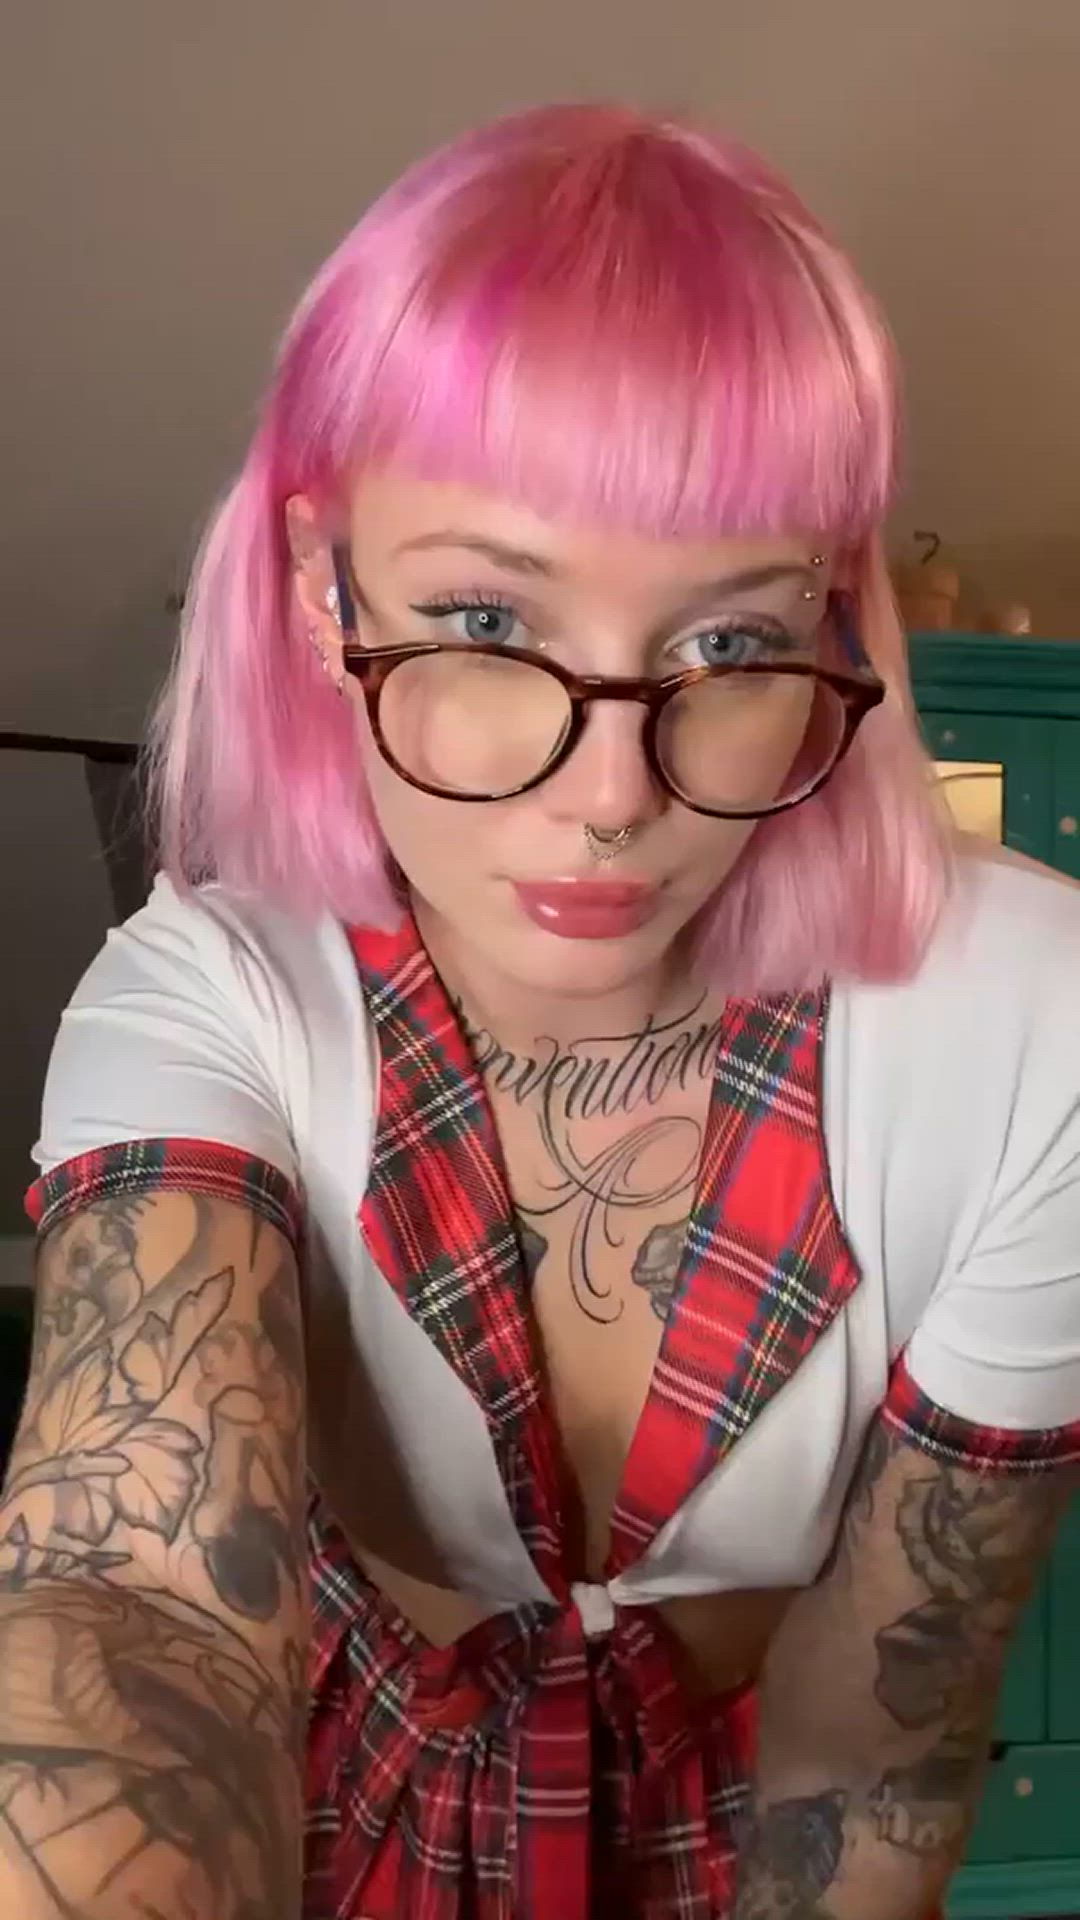 Amateur porn video with onlyfans model stellakink <strong>@stella.kink</strong>